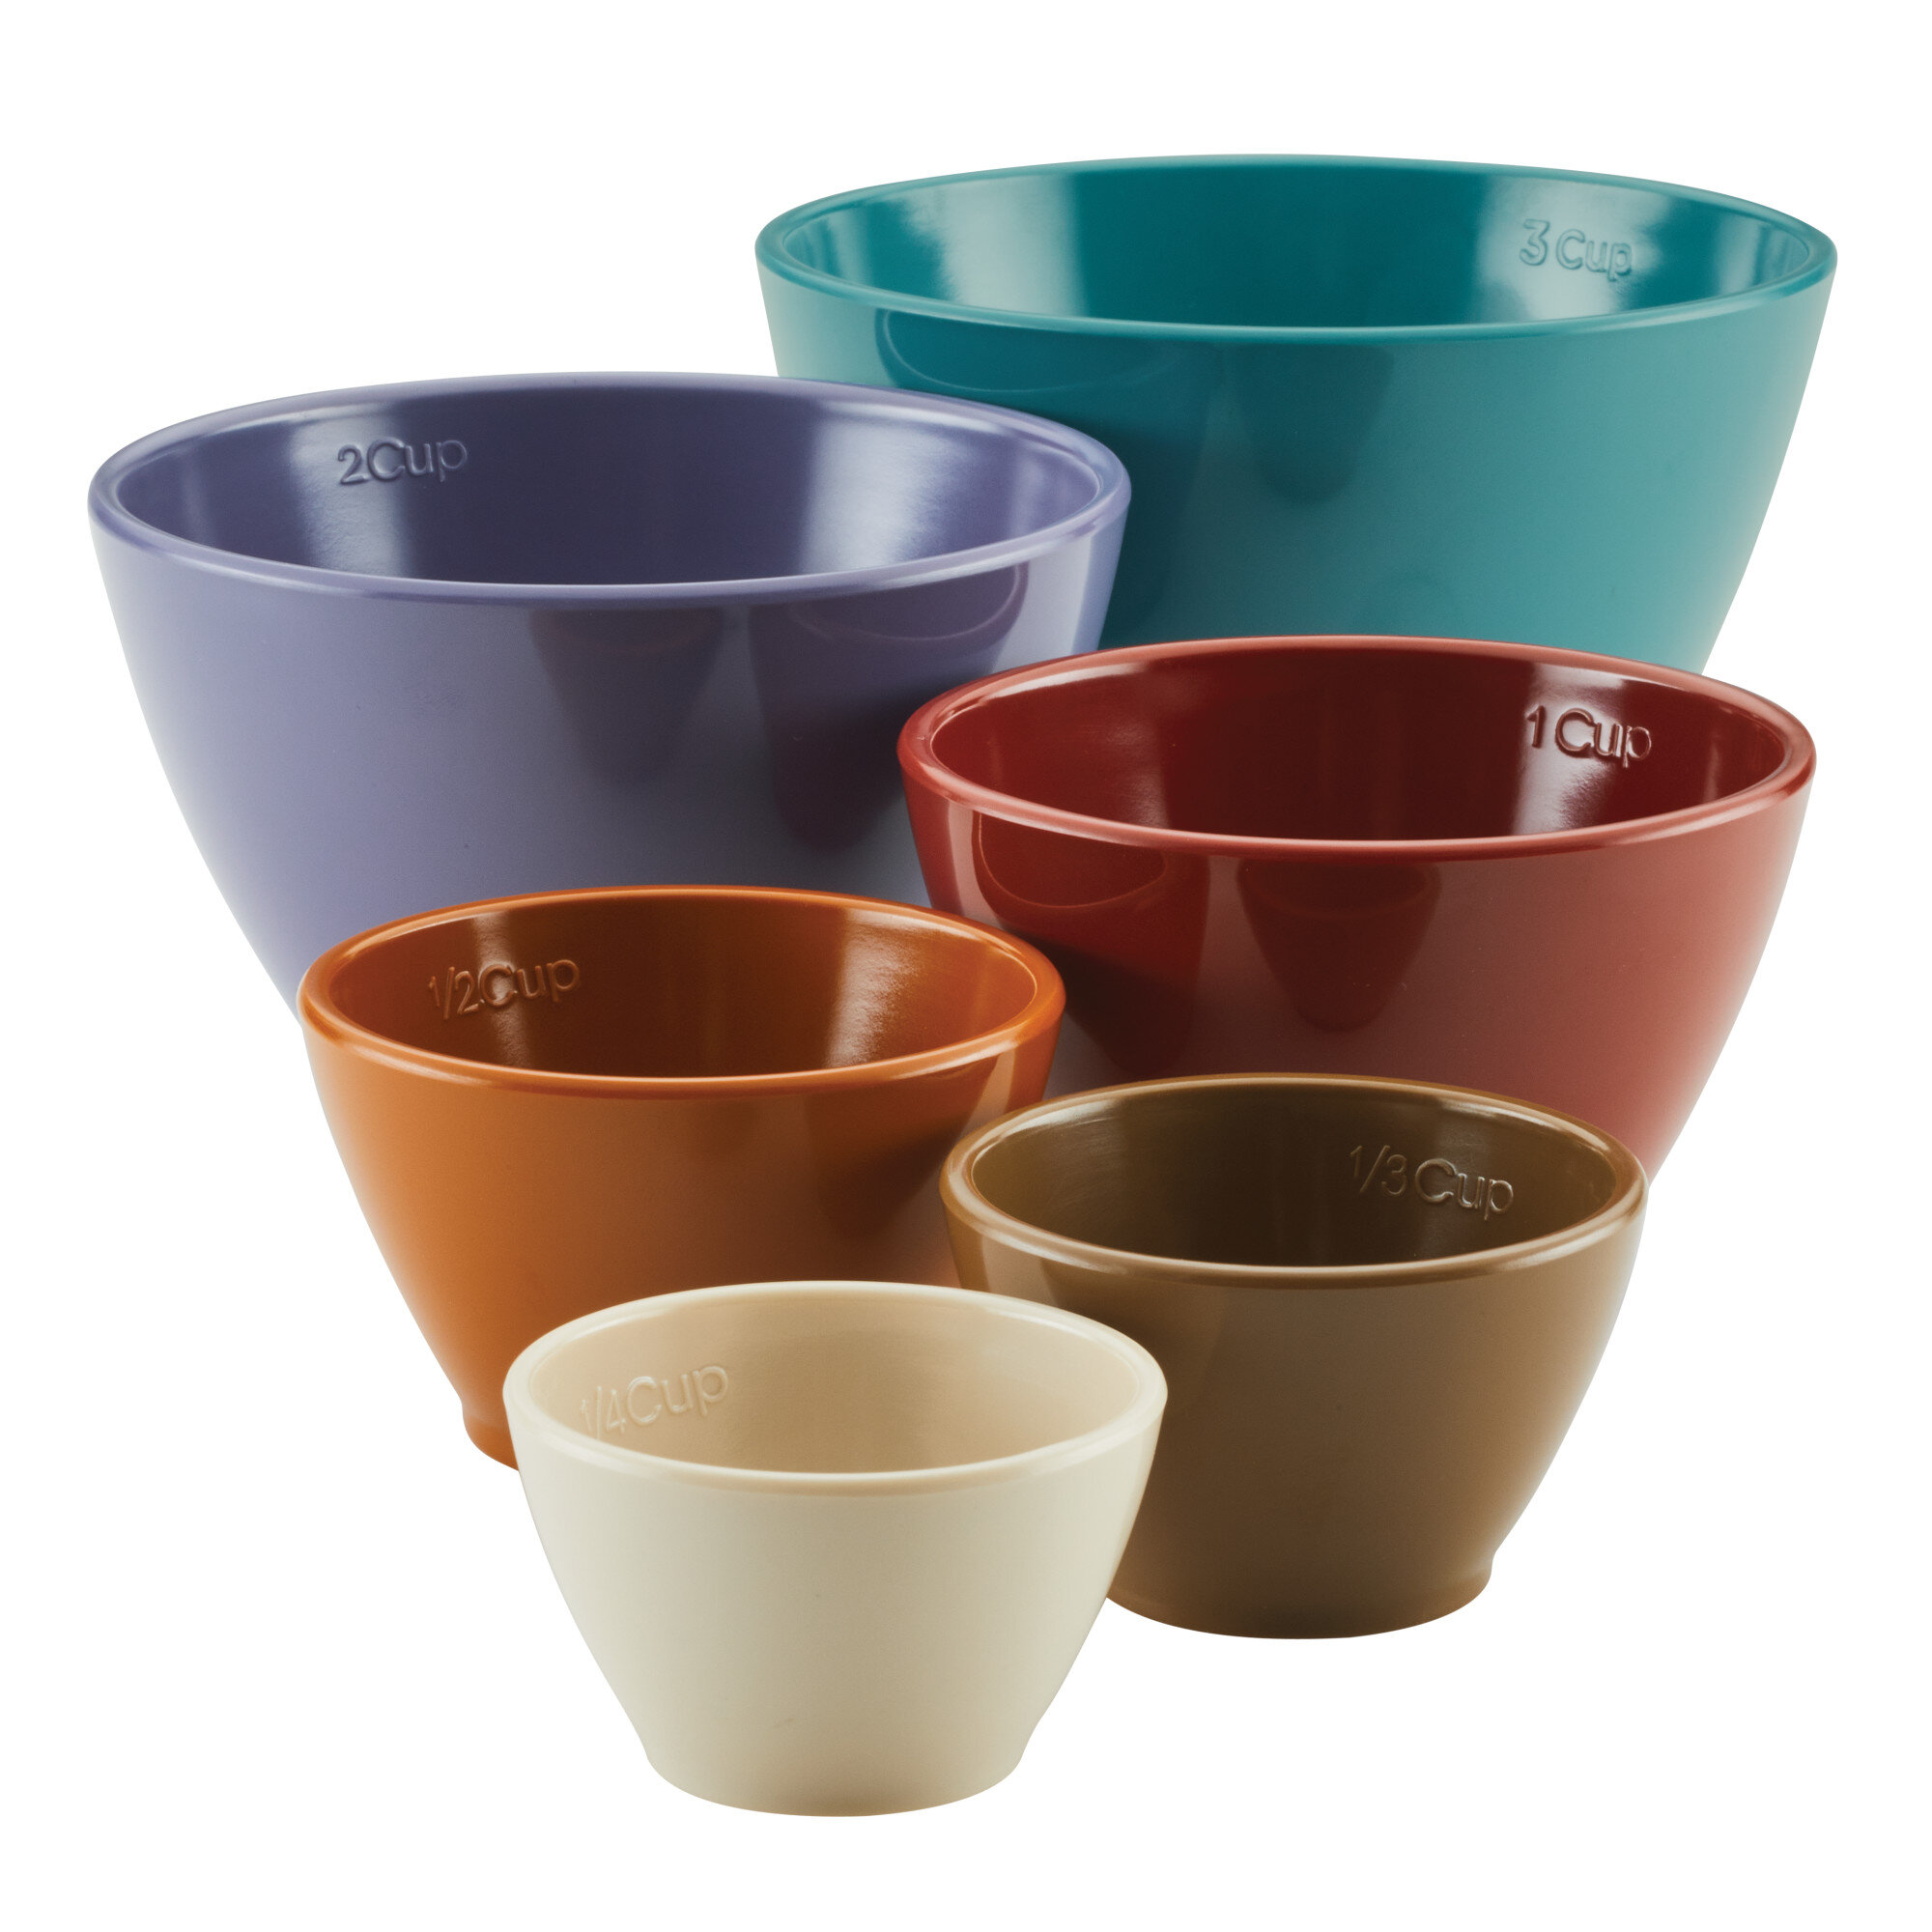 COOK WITH COLOR 8 Piece Nesting Bowls with Measuring Cups Colander